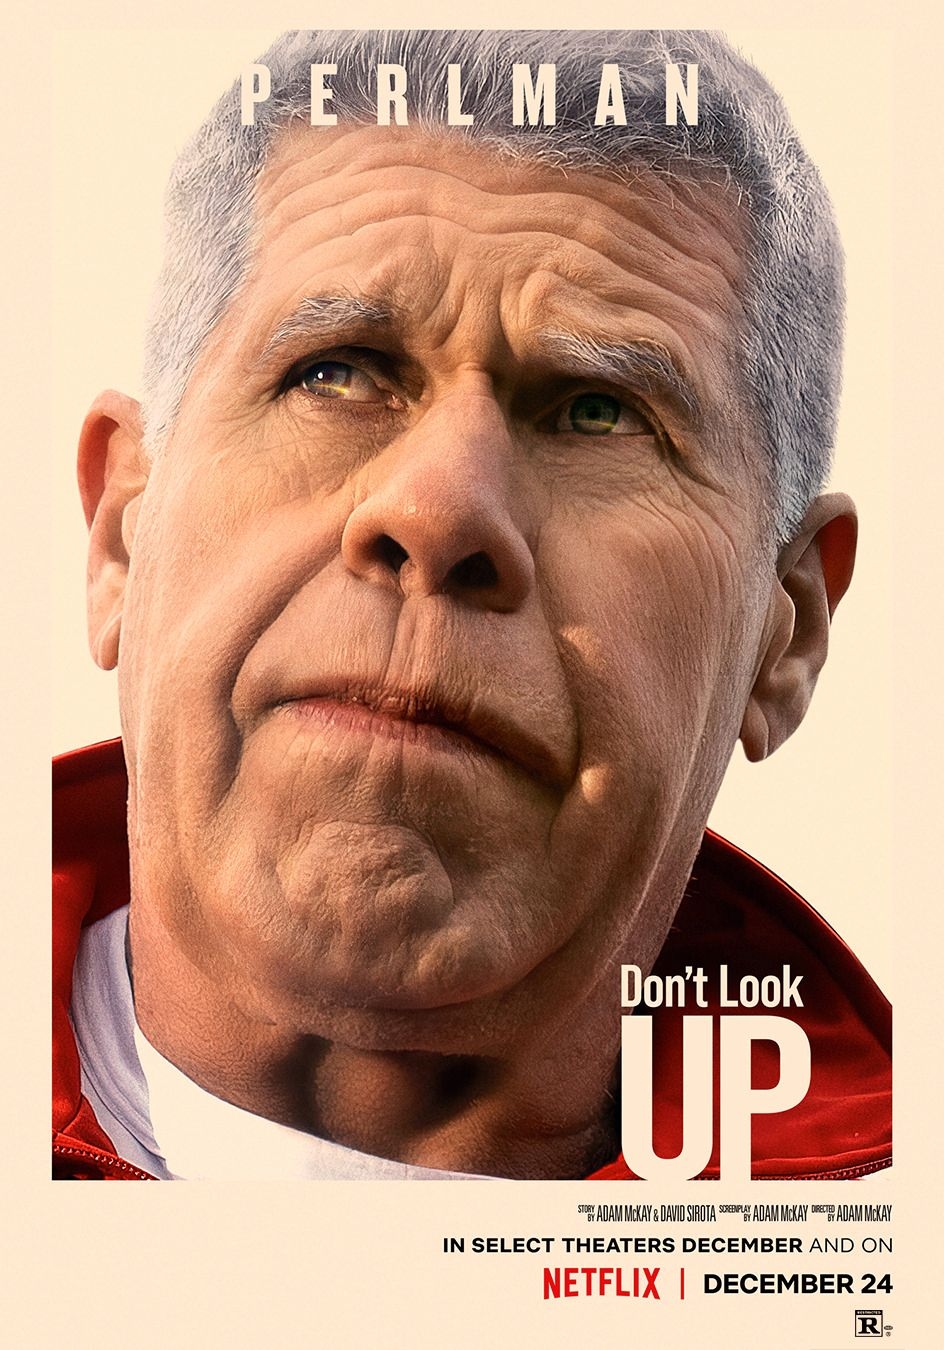 Don’t Look Up | Ron Perlman (Character Poster)